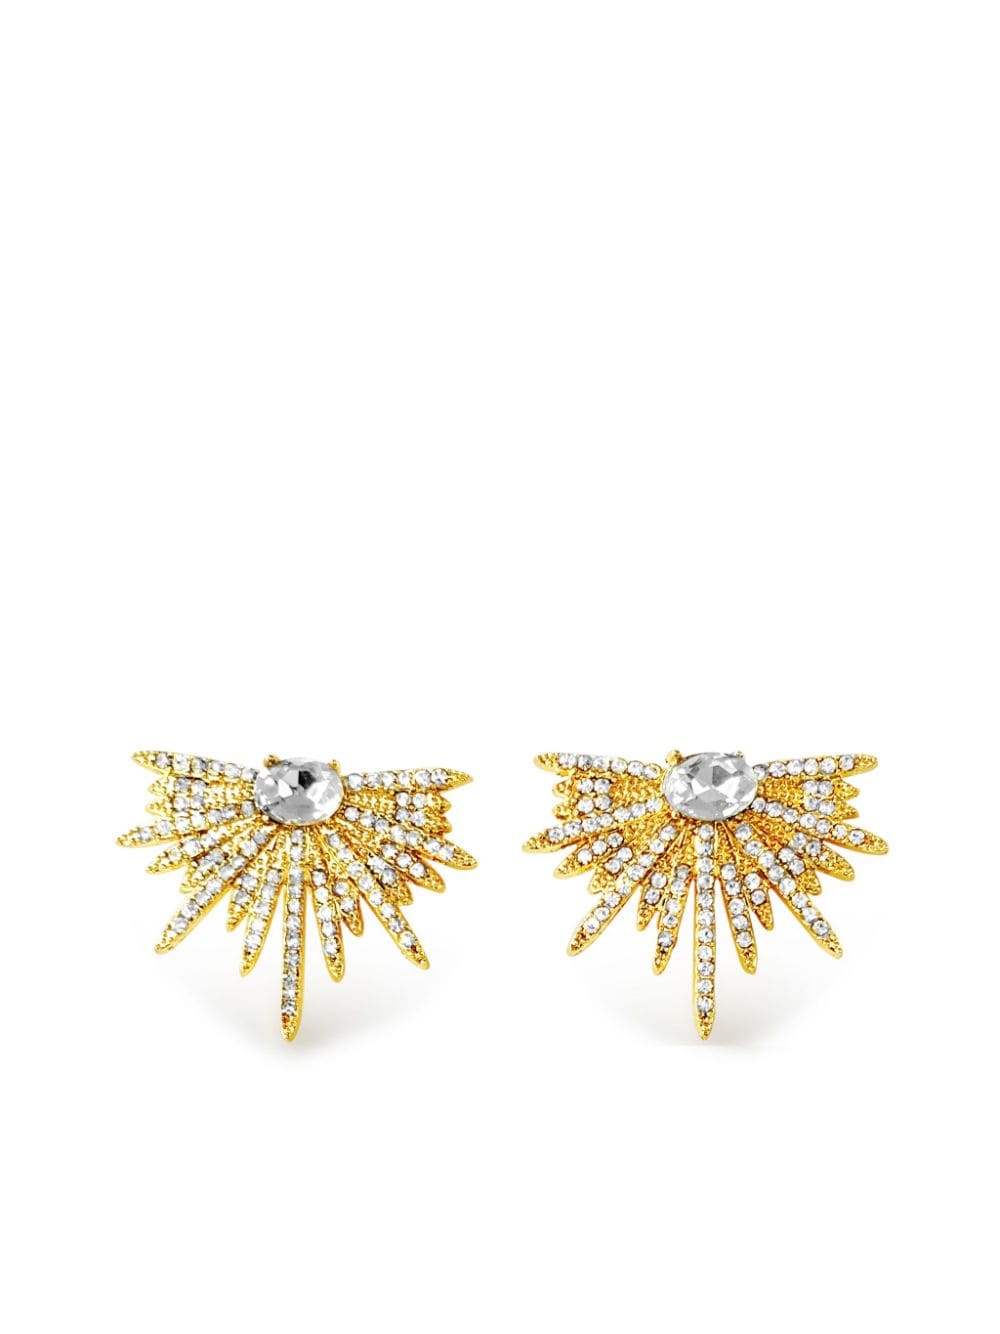 Hzmer Jewelry crystal-embellished earrings - Gold von Hzmer Jewelry